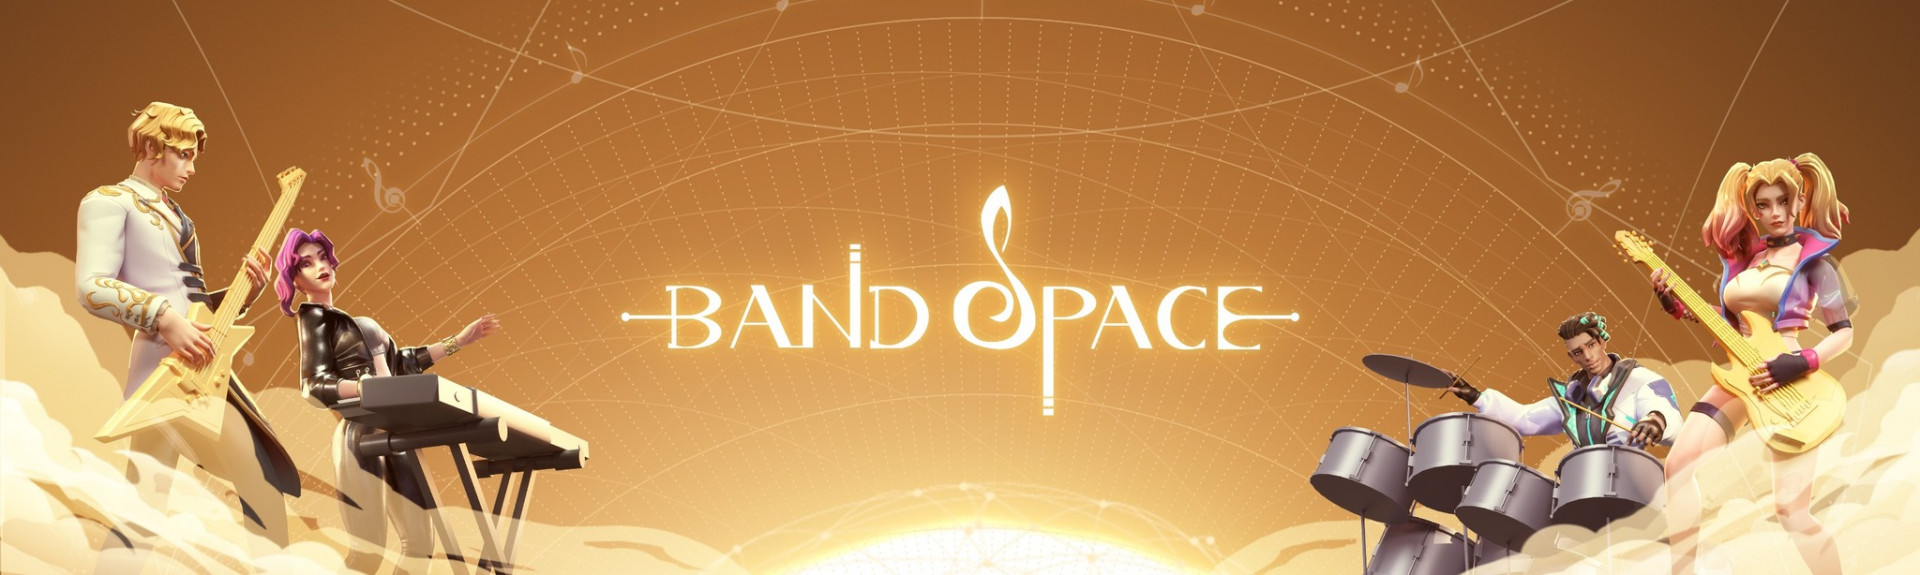 Band Space